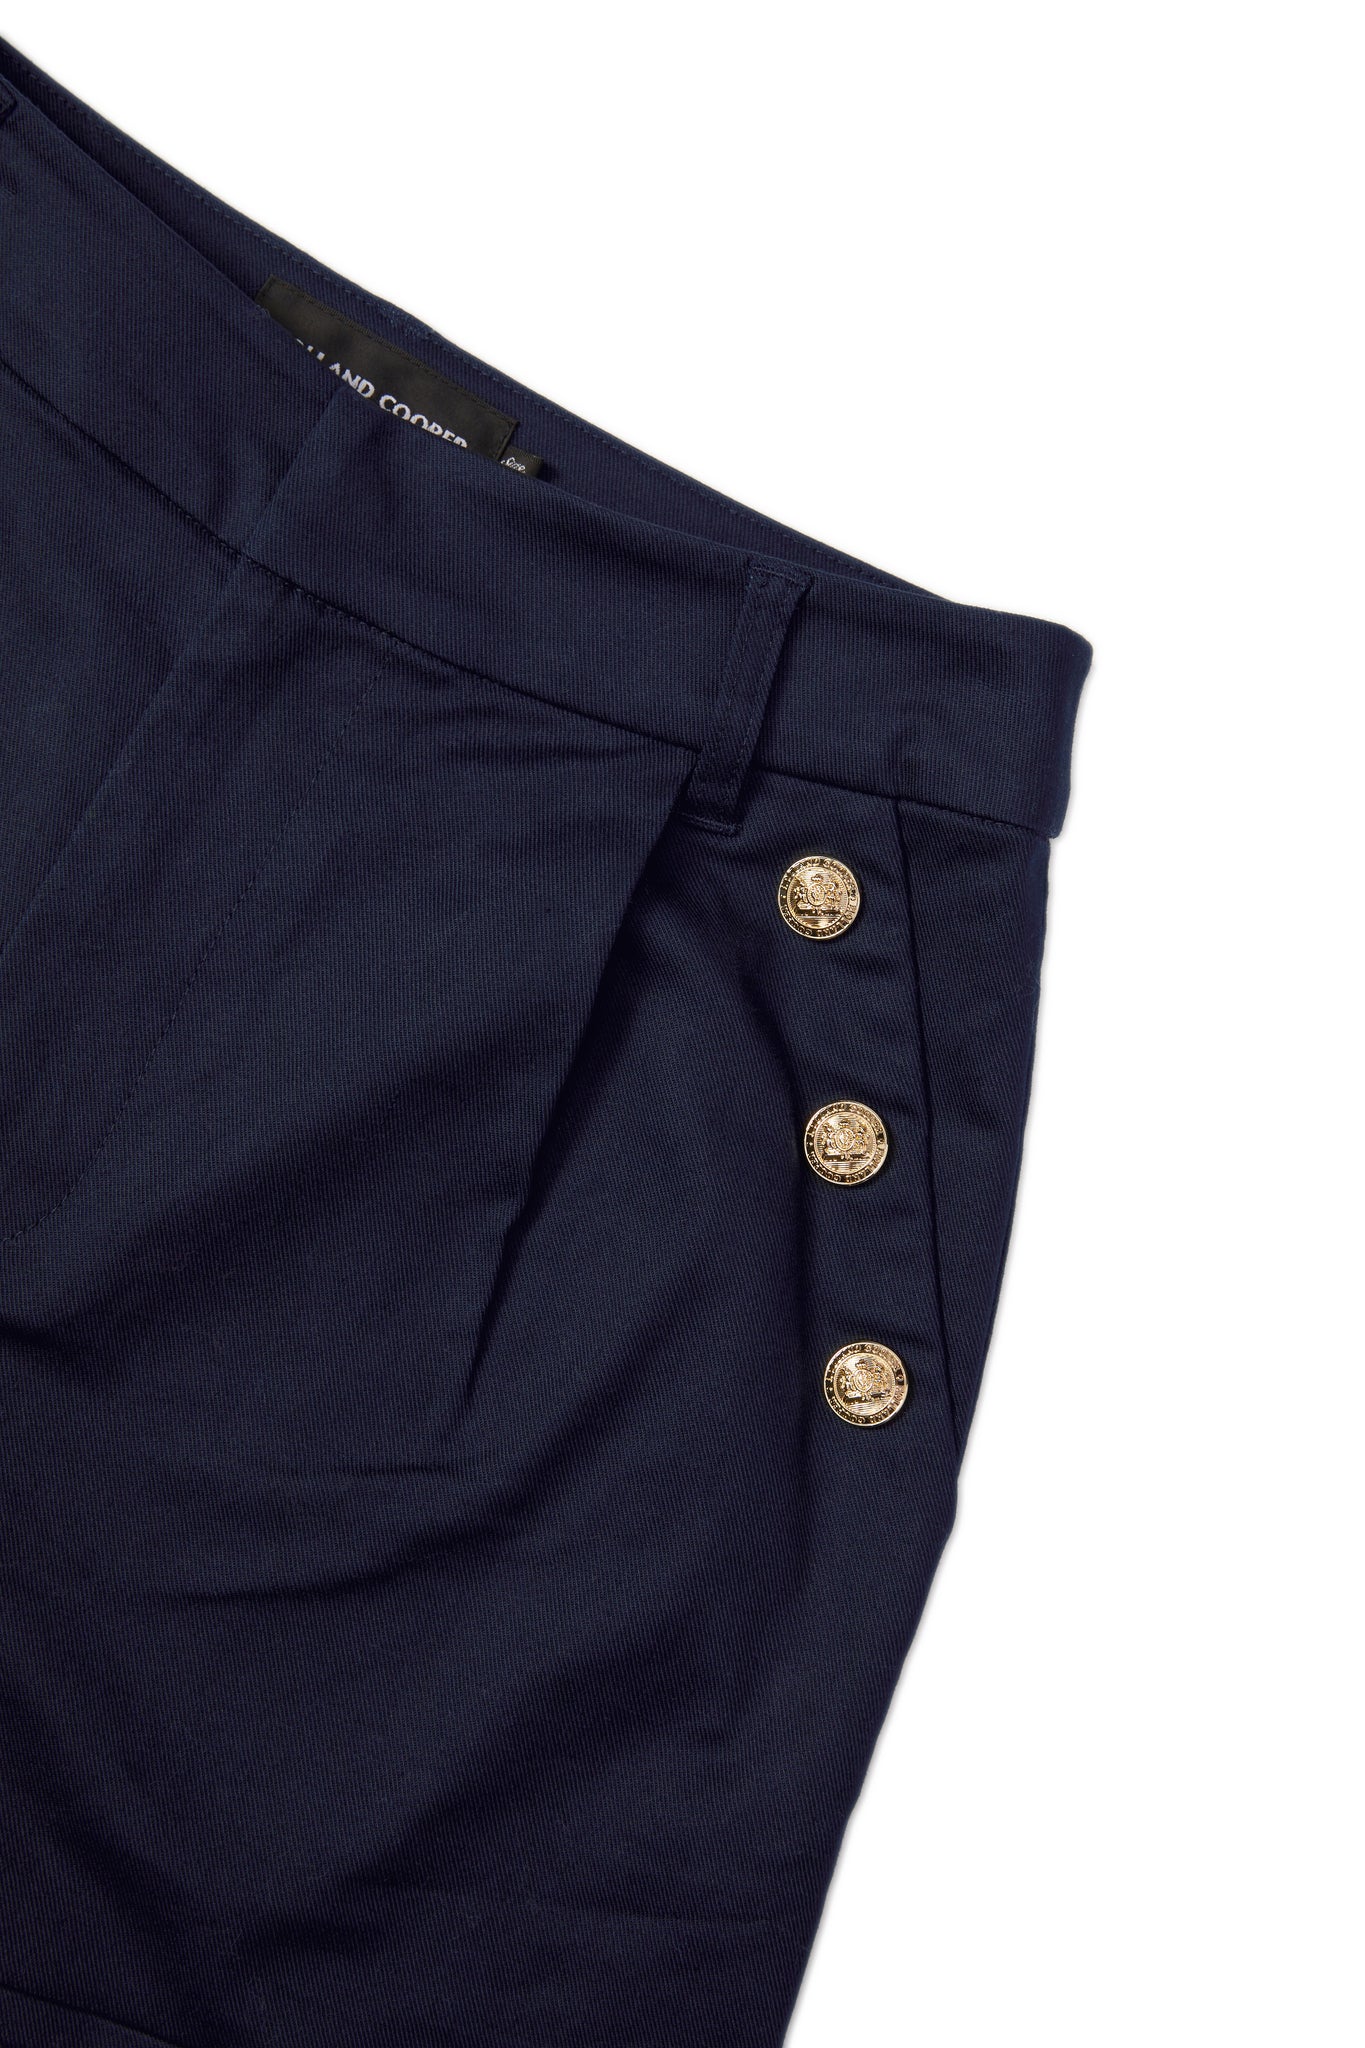 gold rivet pocket detail on womens navy high rise tailored shorts with decorative gold rivets that follow the pocket line in a sailor style with a turned up hem